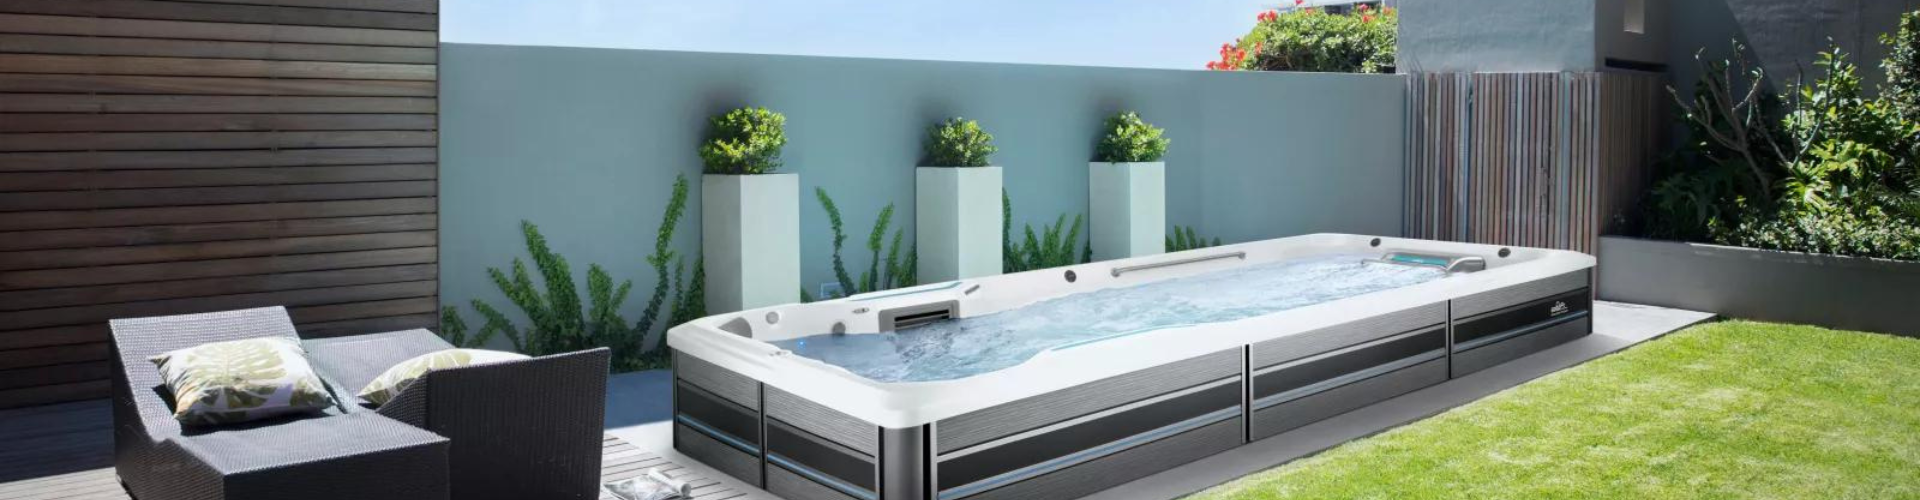 Does a Swim Spa Increase Home Value?